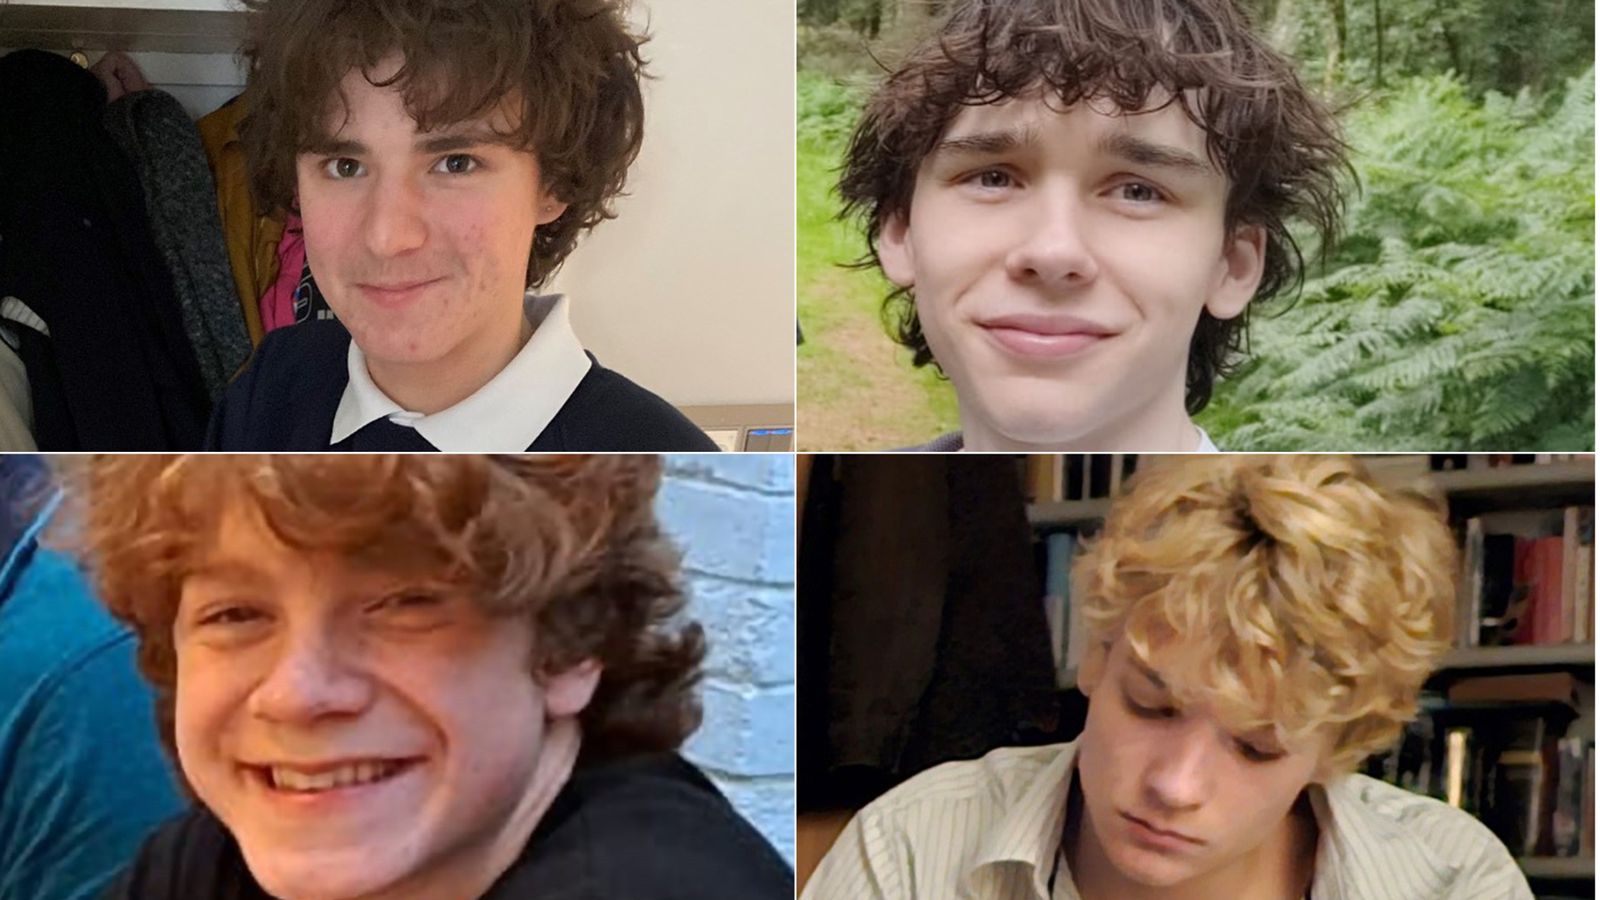 North Wales Police launch search and issue appeal to find four young men missing in Gwynedd